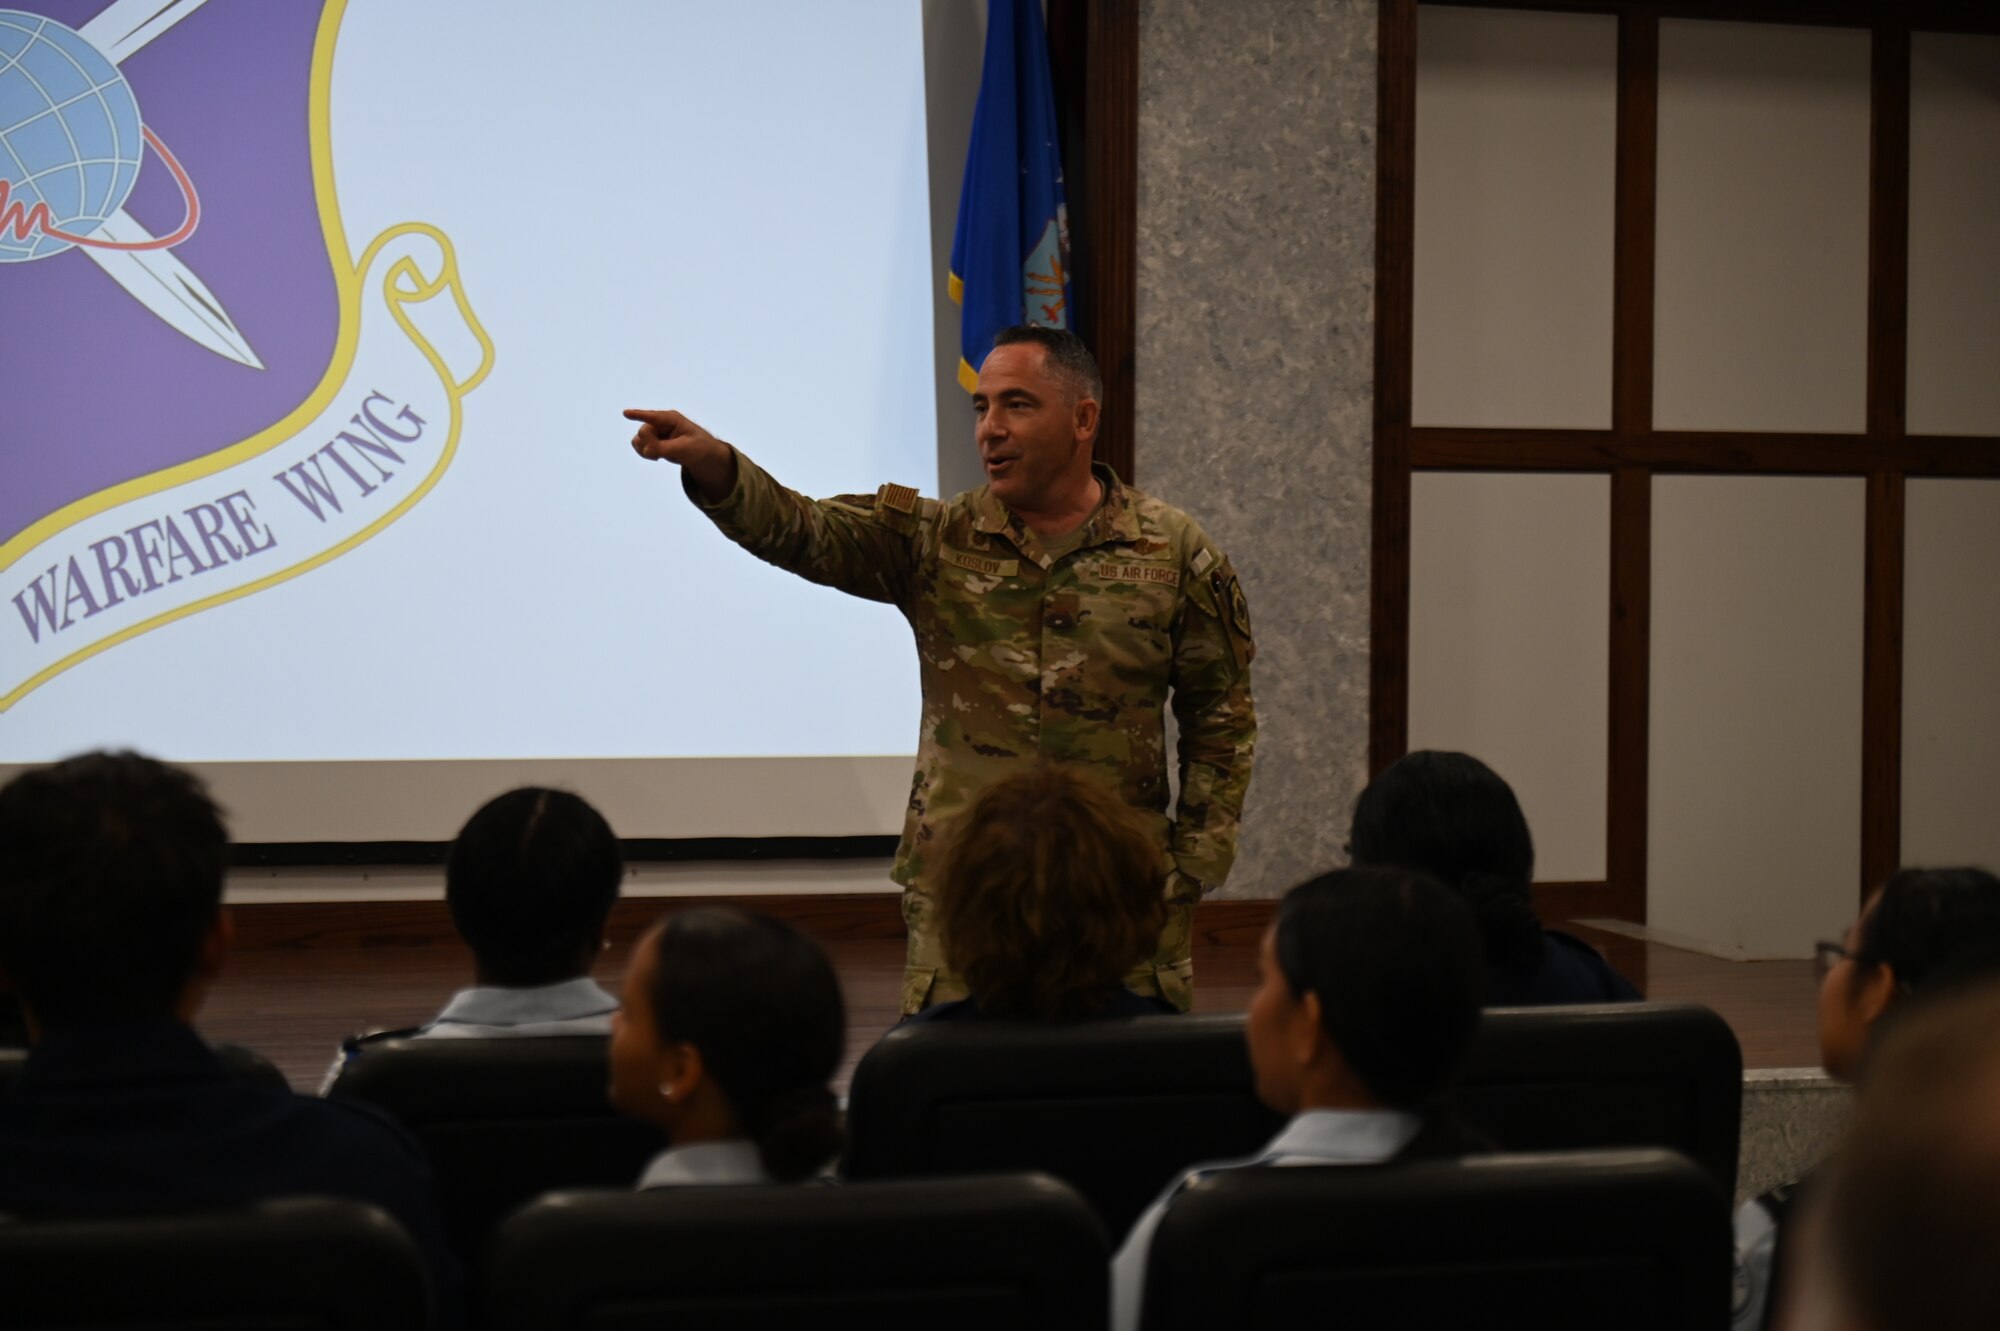 U.S. Air Force Col. Josh Koslov, 350th Spectrum Warfare Wing commander, briefs Pensacola High School Air Force JROTC cadets during a wing visit at Eglin Air Force, Fla., Nov. 1, 2023. Cadets visited the 350th SWW to learn more about the operational Air Force, the wing’s mission to provide expert Electronic Warfare support and attack as well as learn about future career opportunities. (U.S. Air Force photo by Capt. Benjamin Aronson)